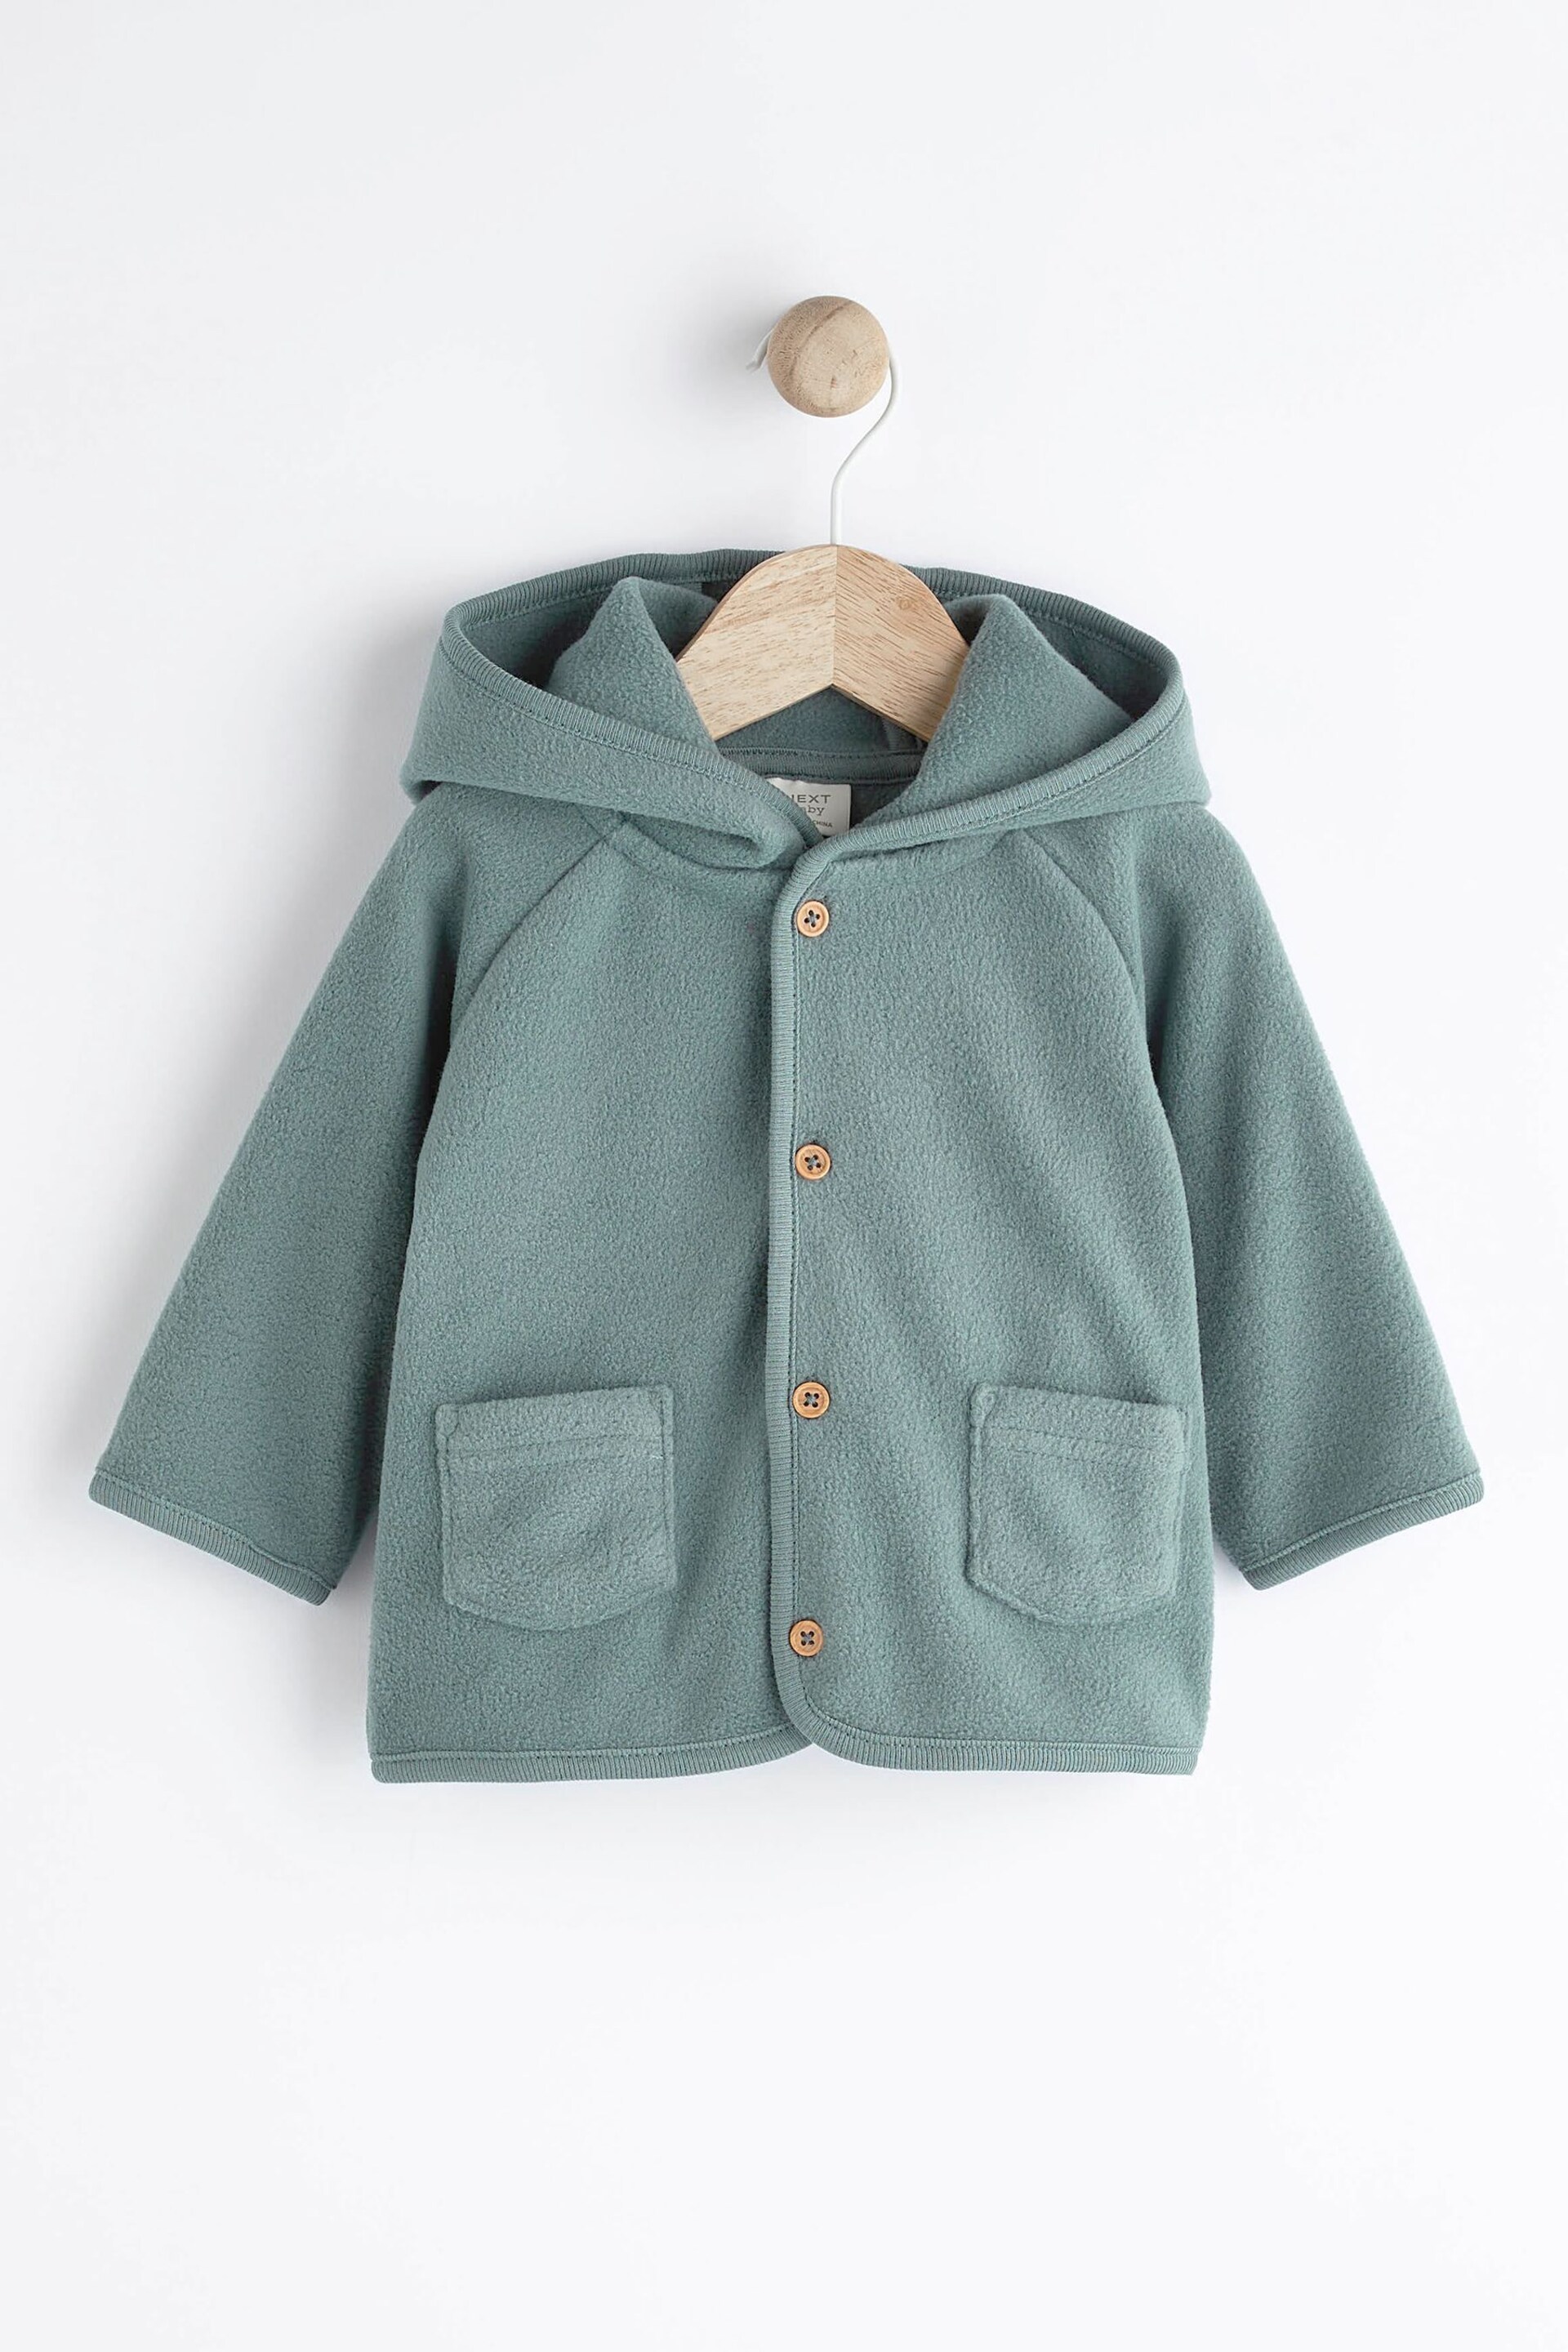 Teal Blue Hooded Cosy Fleece Baby Jacket (0mths-2yrs) - Image 1 of 6